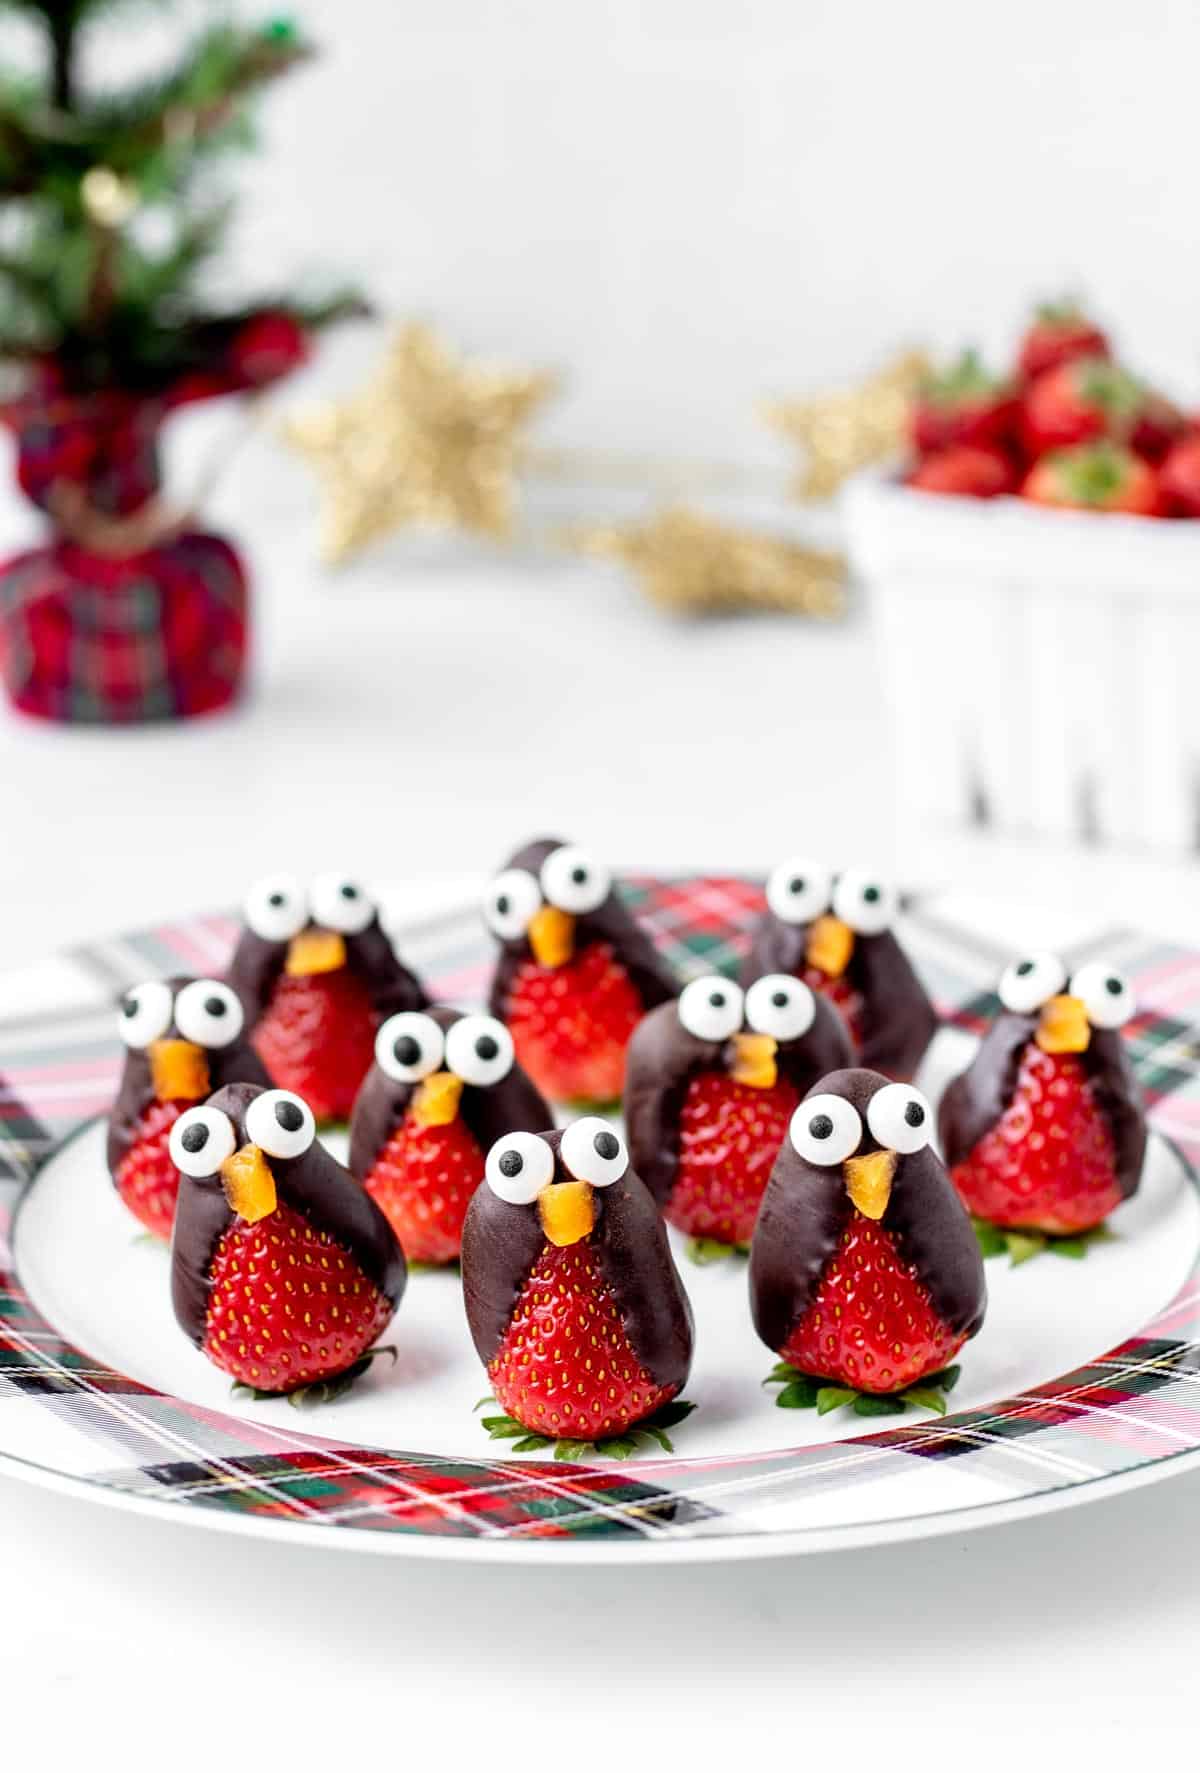 A festive plate filled with penguin strawberries.